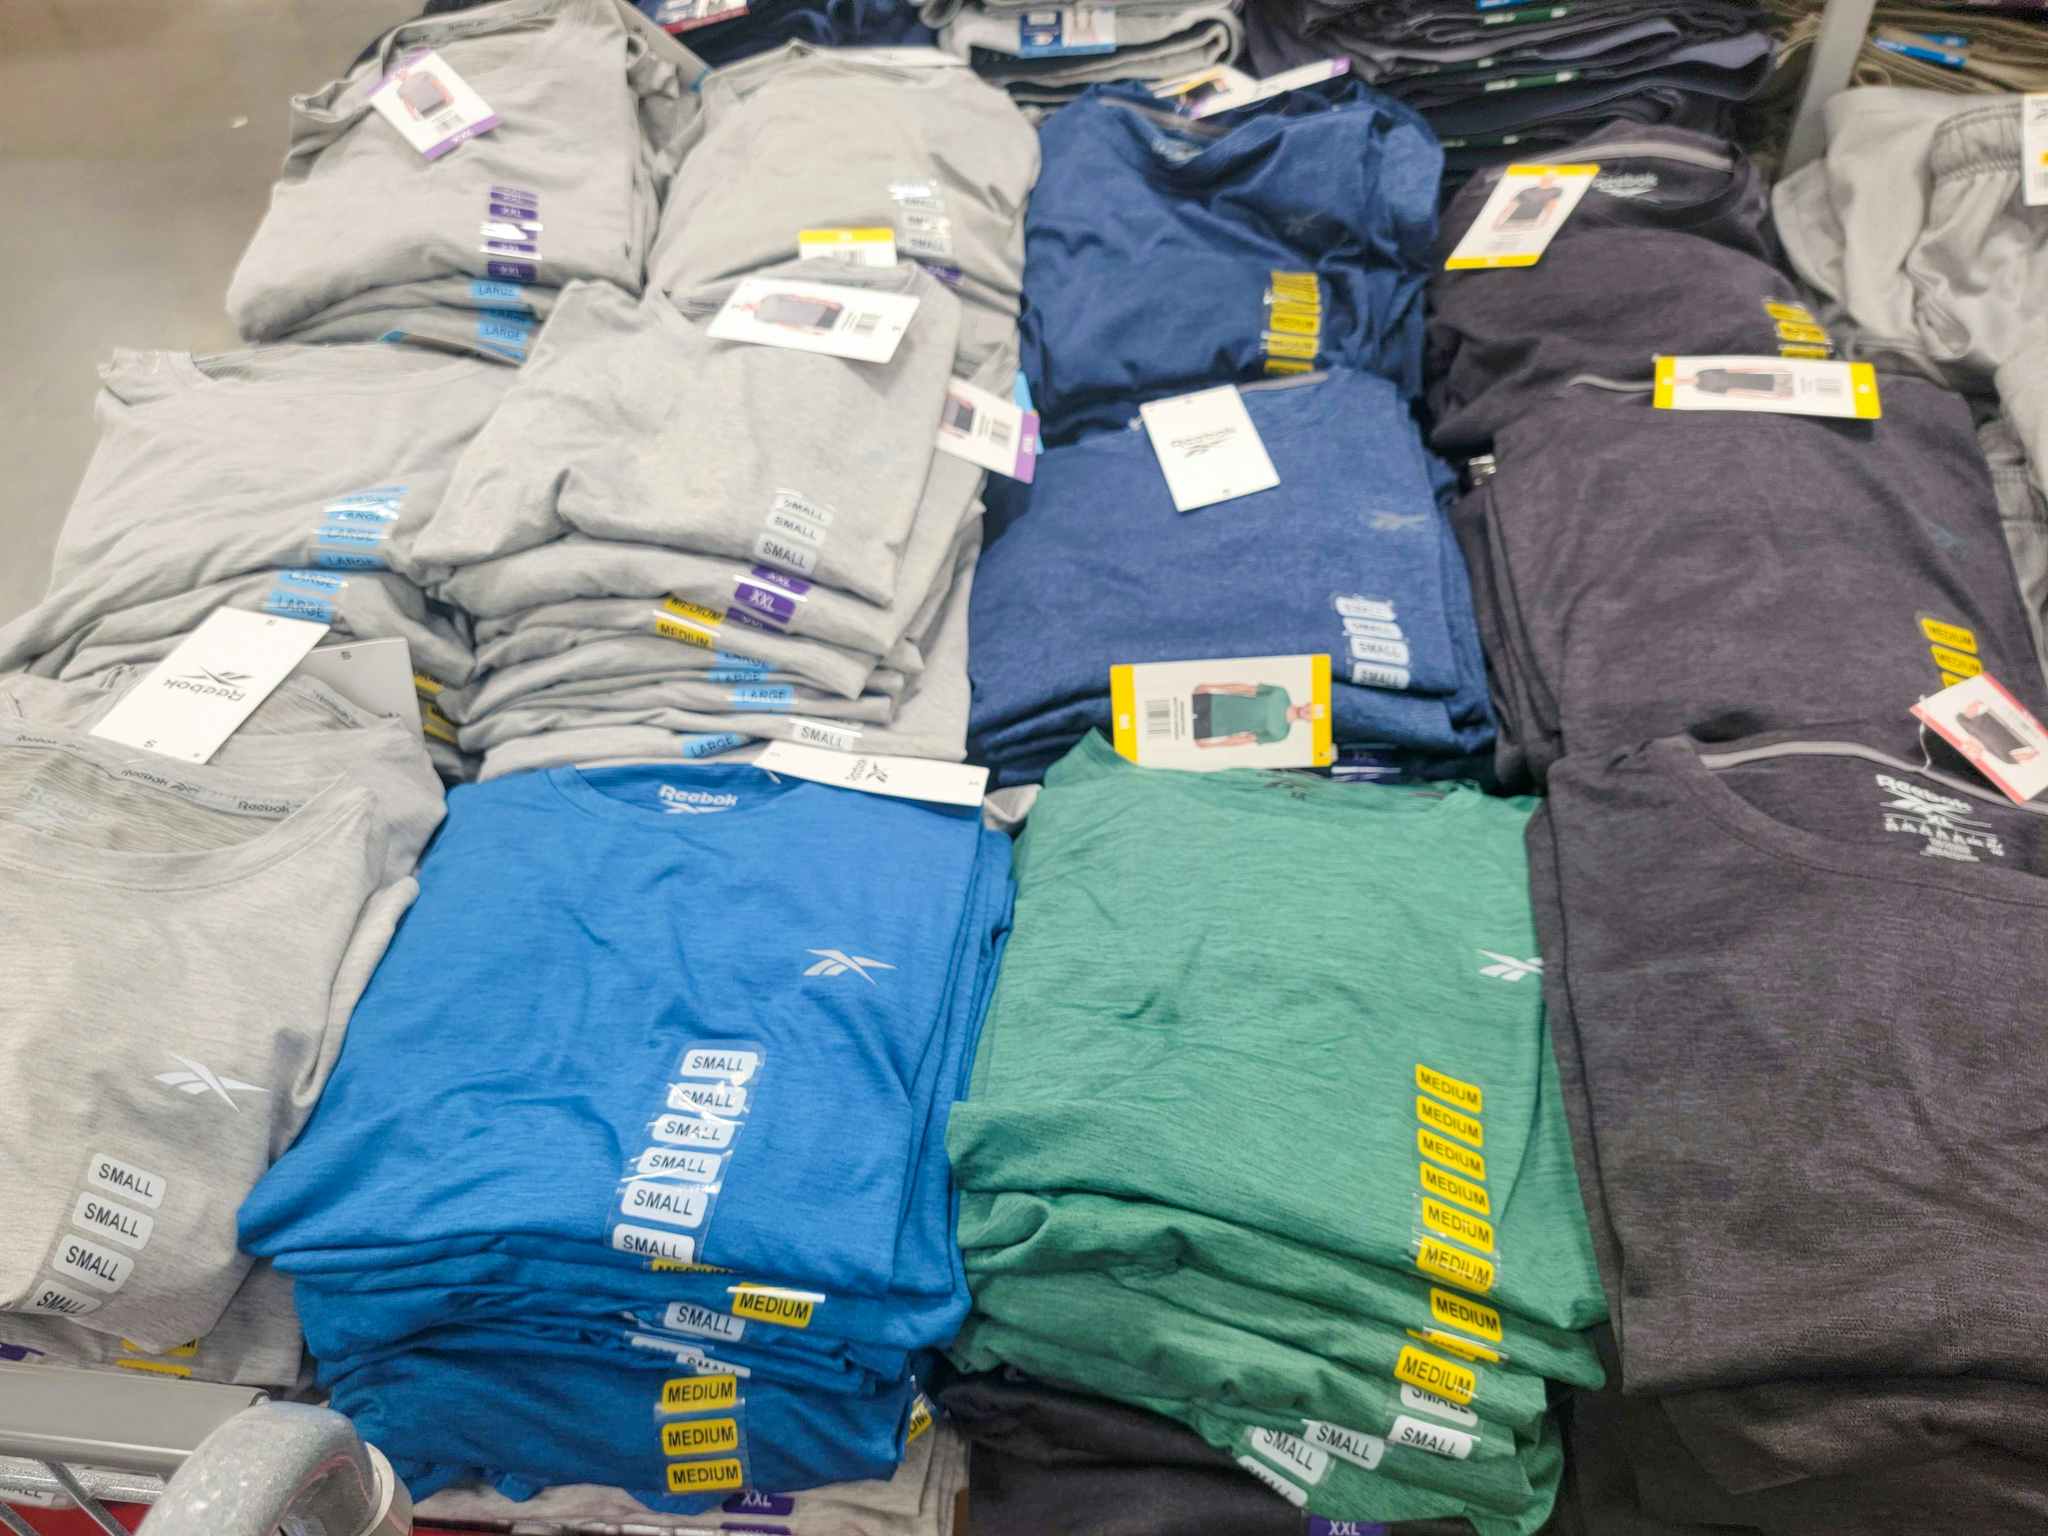 Men's Reebok shirts on a table in a variety of colors